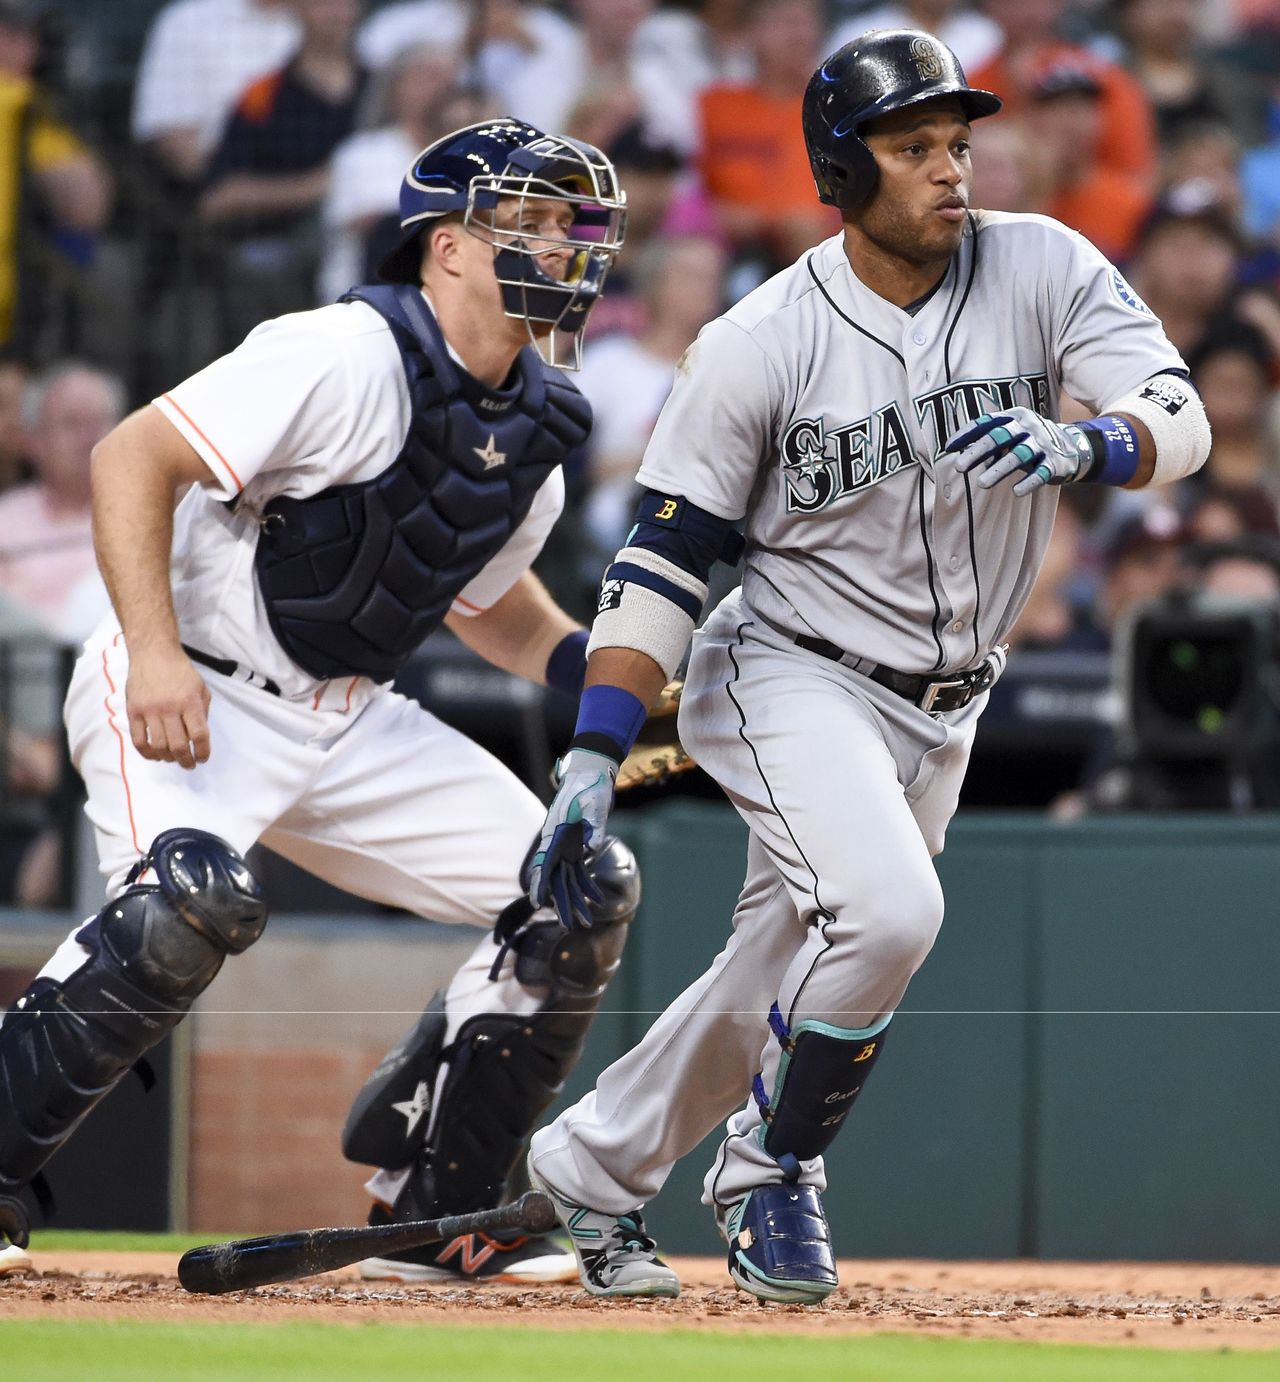 The Mariners’ Robinson Cano hits an RBI single in the third inning of a game against the Astros on Thursday in Houston.